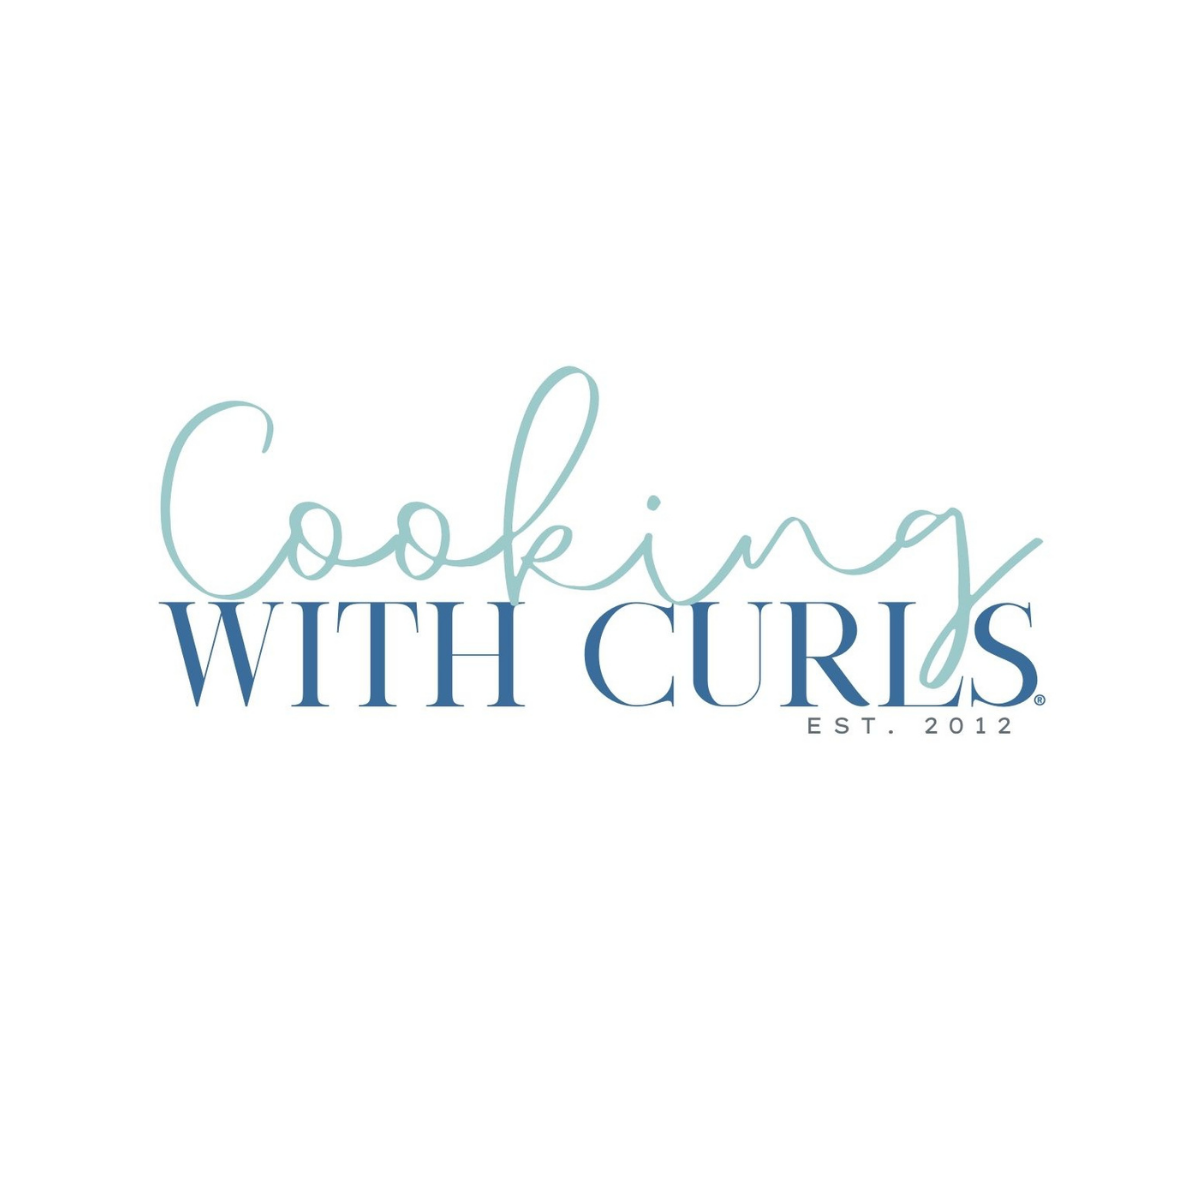 Cooking with Curls Logo